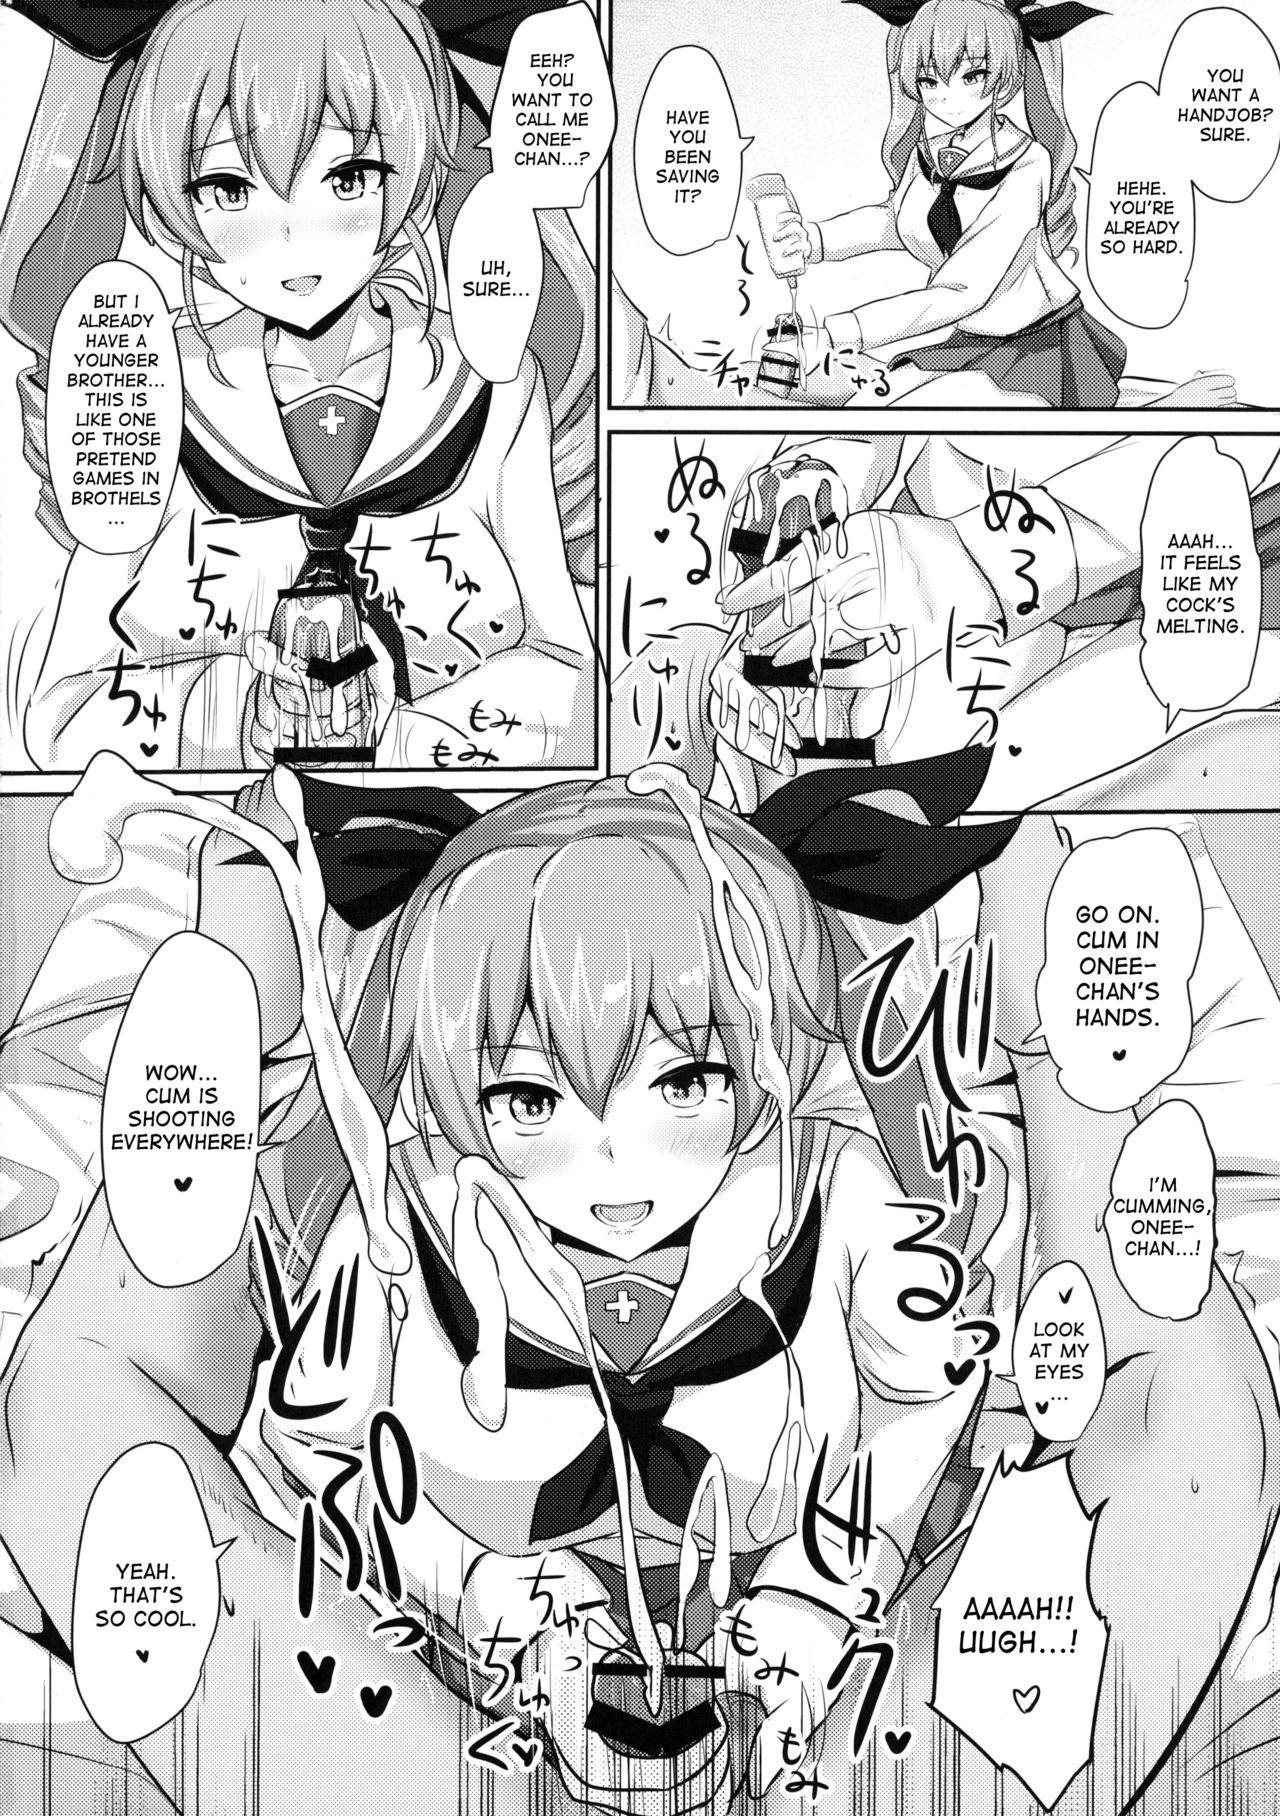 Cock Suckers Anchovy Nee-san White Sauce Zoe - Girls und panzer Tranny Porn - Page 5